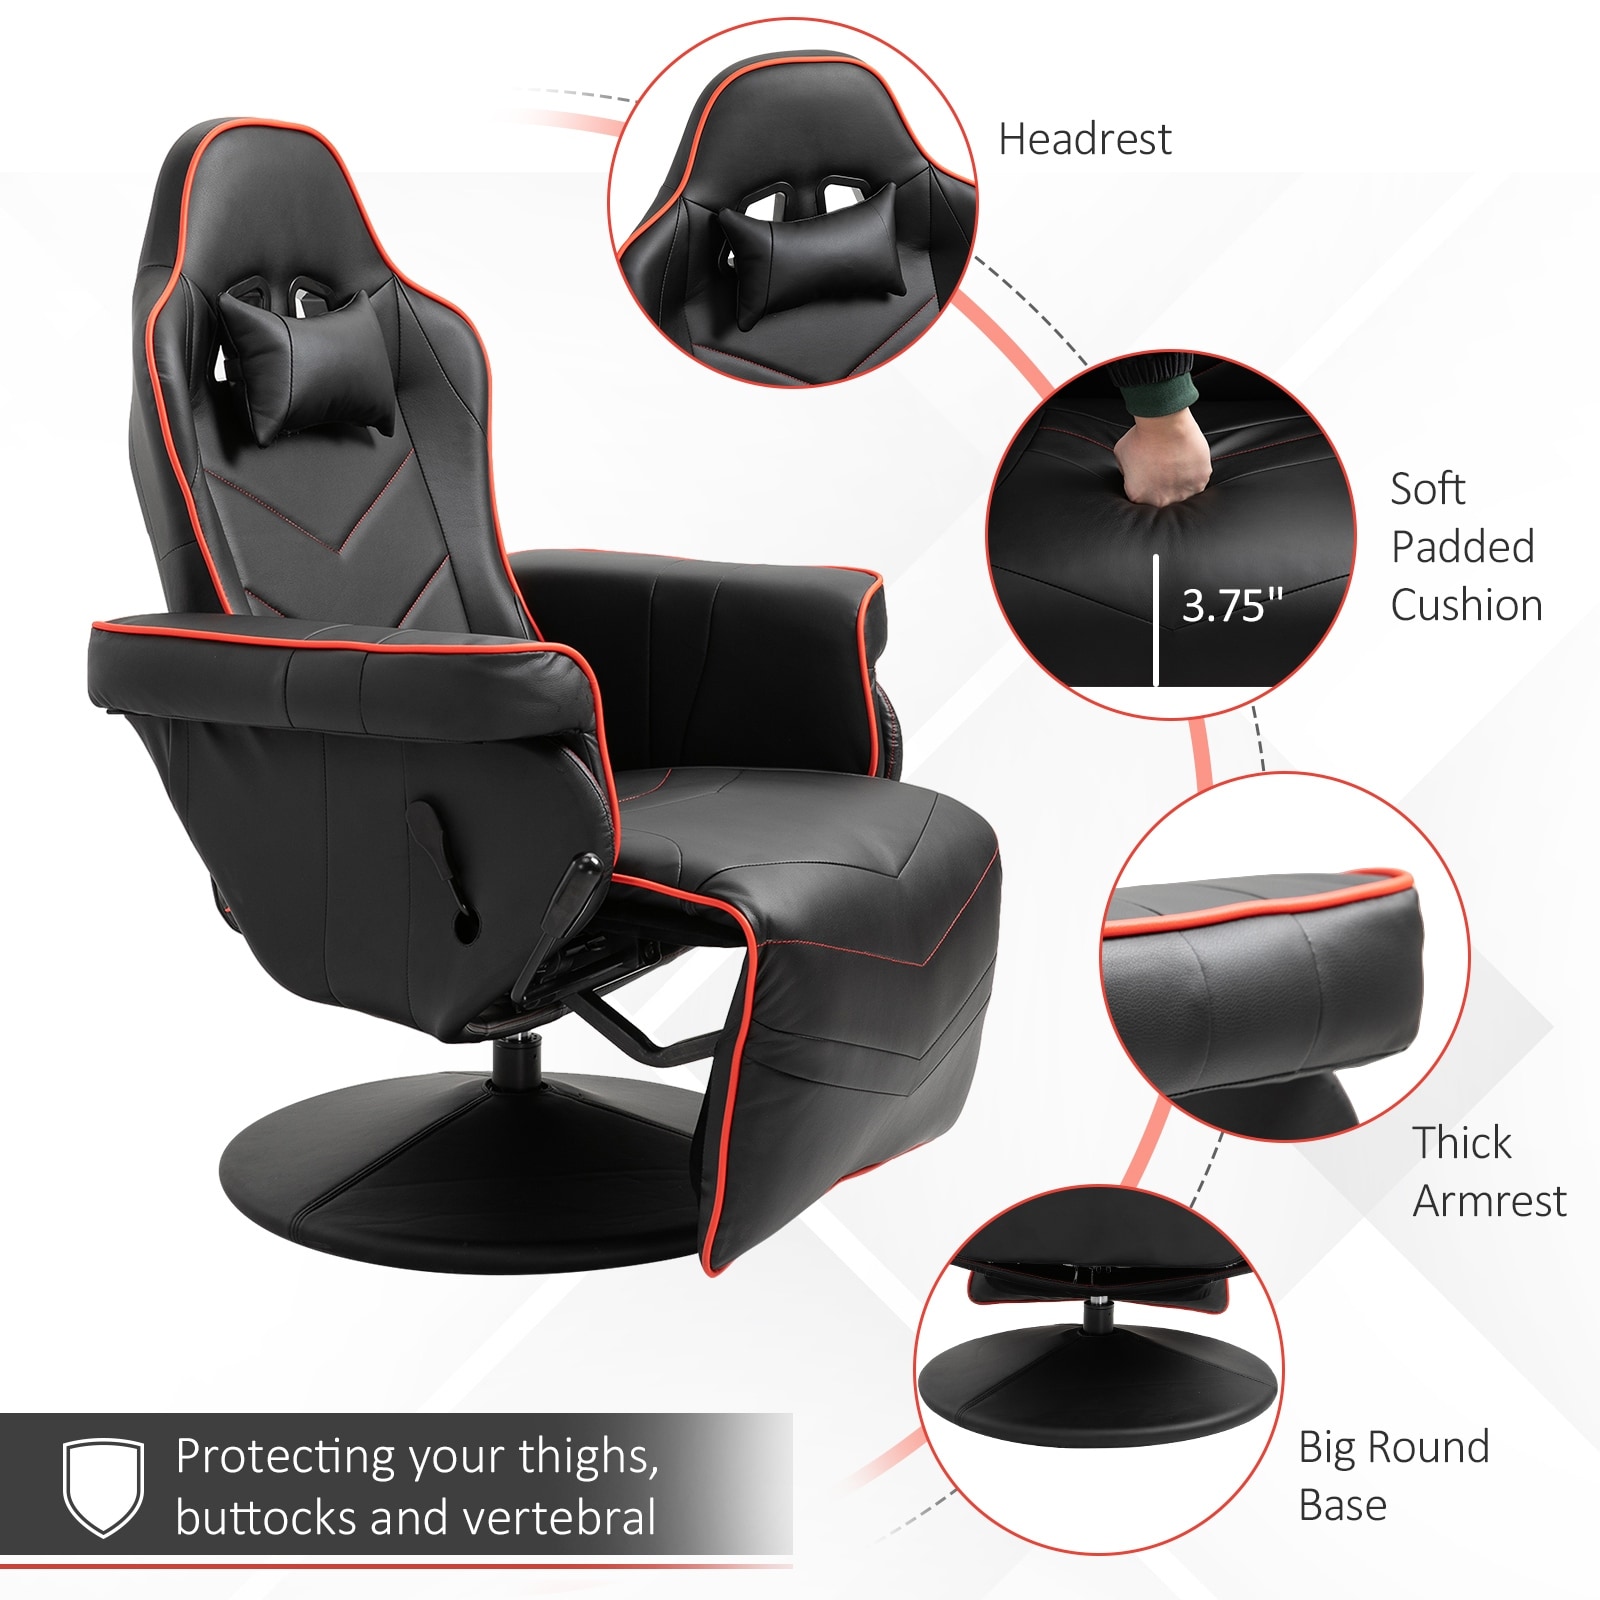 https://ak1.ostkcdn.com/images/products/is/images/direct/3a364e15627f898dbd7f0e591462b9fd994161ac/Vinsetto-Home-Comfortable-Office-Video-Game-Sofa-Swivel-Chair-with-a-Strong-Ergonomic-Design-%26-Quality-Material.jpg